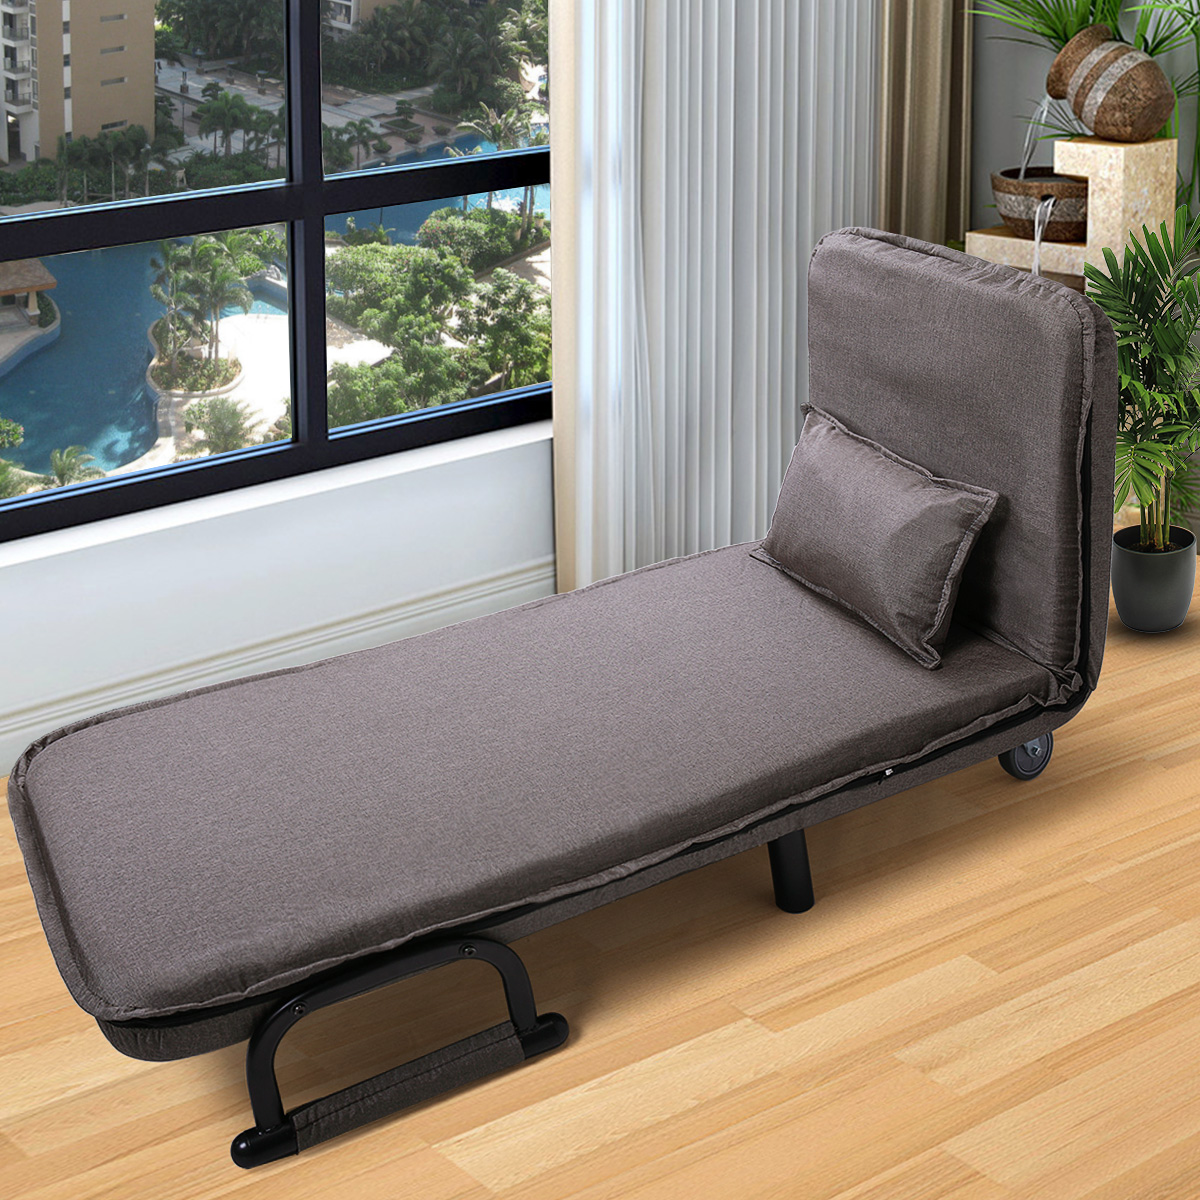 Lowestbest Folding Lazy Sofa Chair, Recliner Chair, Sofa Bed, Floor Chair, Adjustable Sofa Couch Beds, Lounge Chair, Brown - image 3 of 8